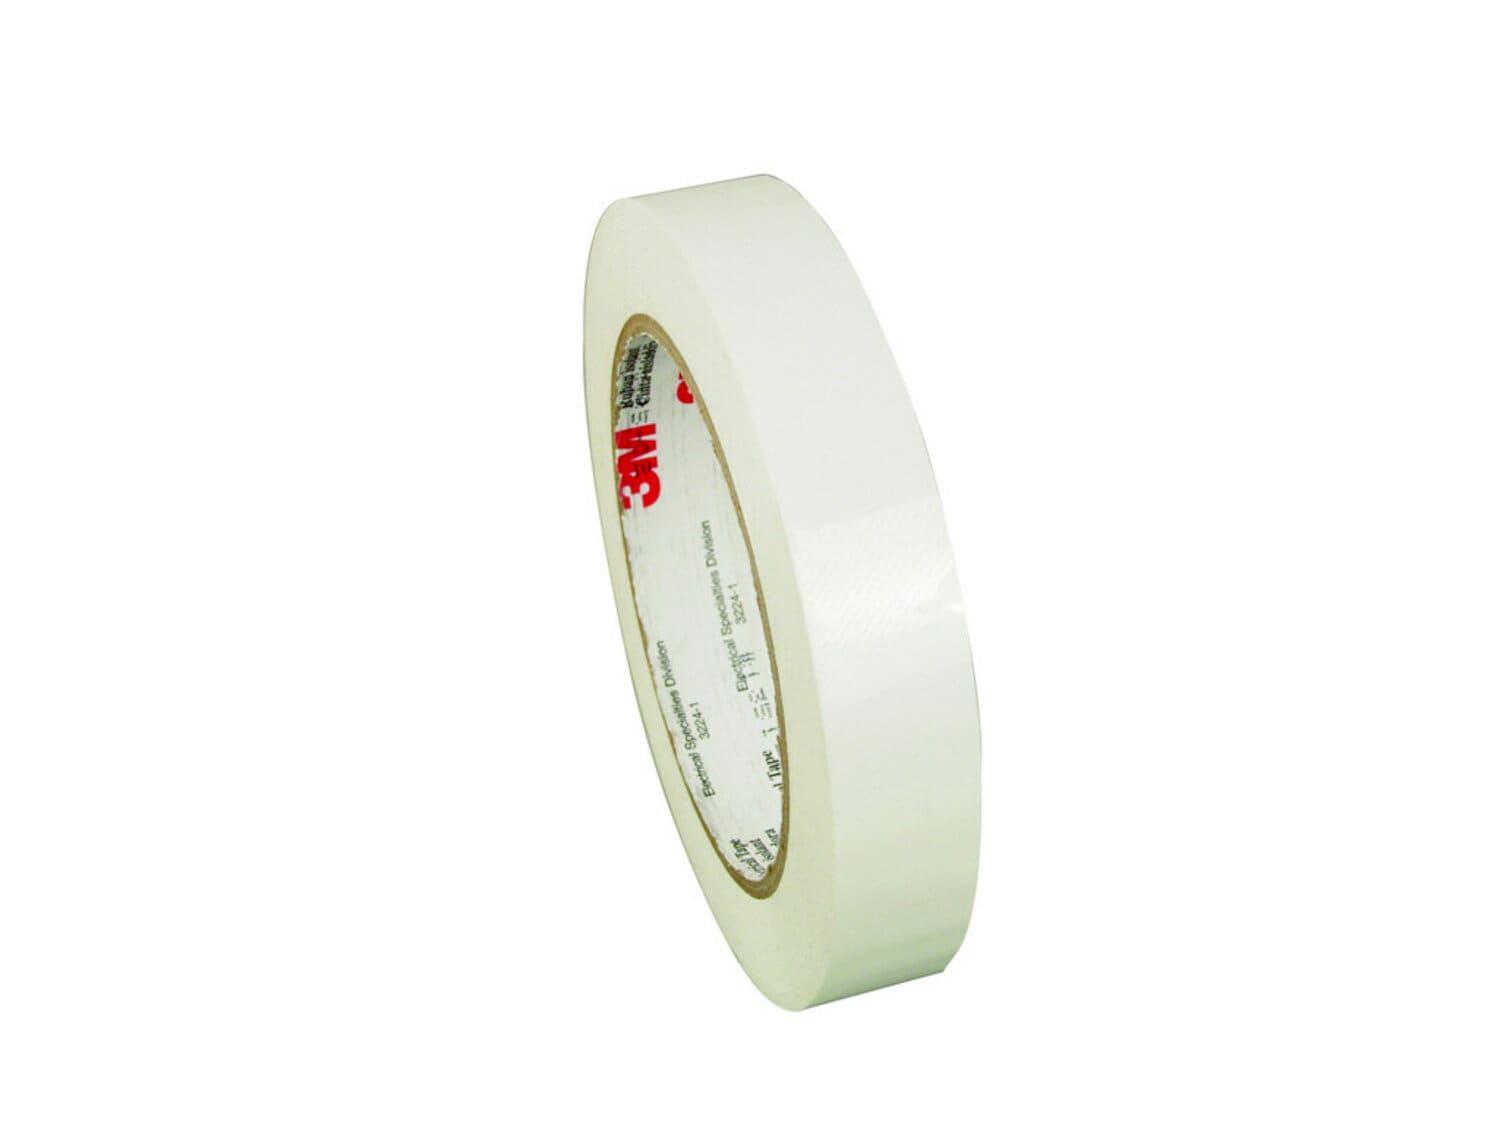 7010401261 - 3M Polyester Film Electrical Tape 1350F-1, White, 24 in x 216 yds, 3-in
paper core, Log roll, 1 Roll/Case